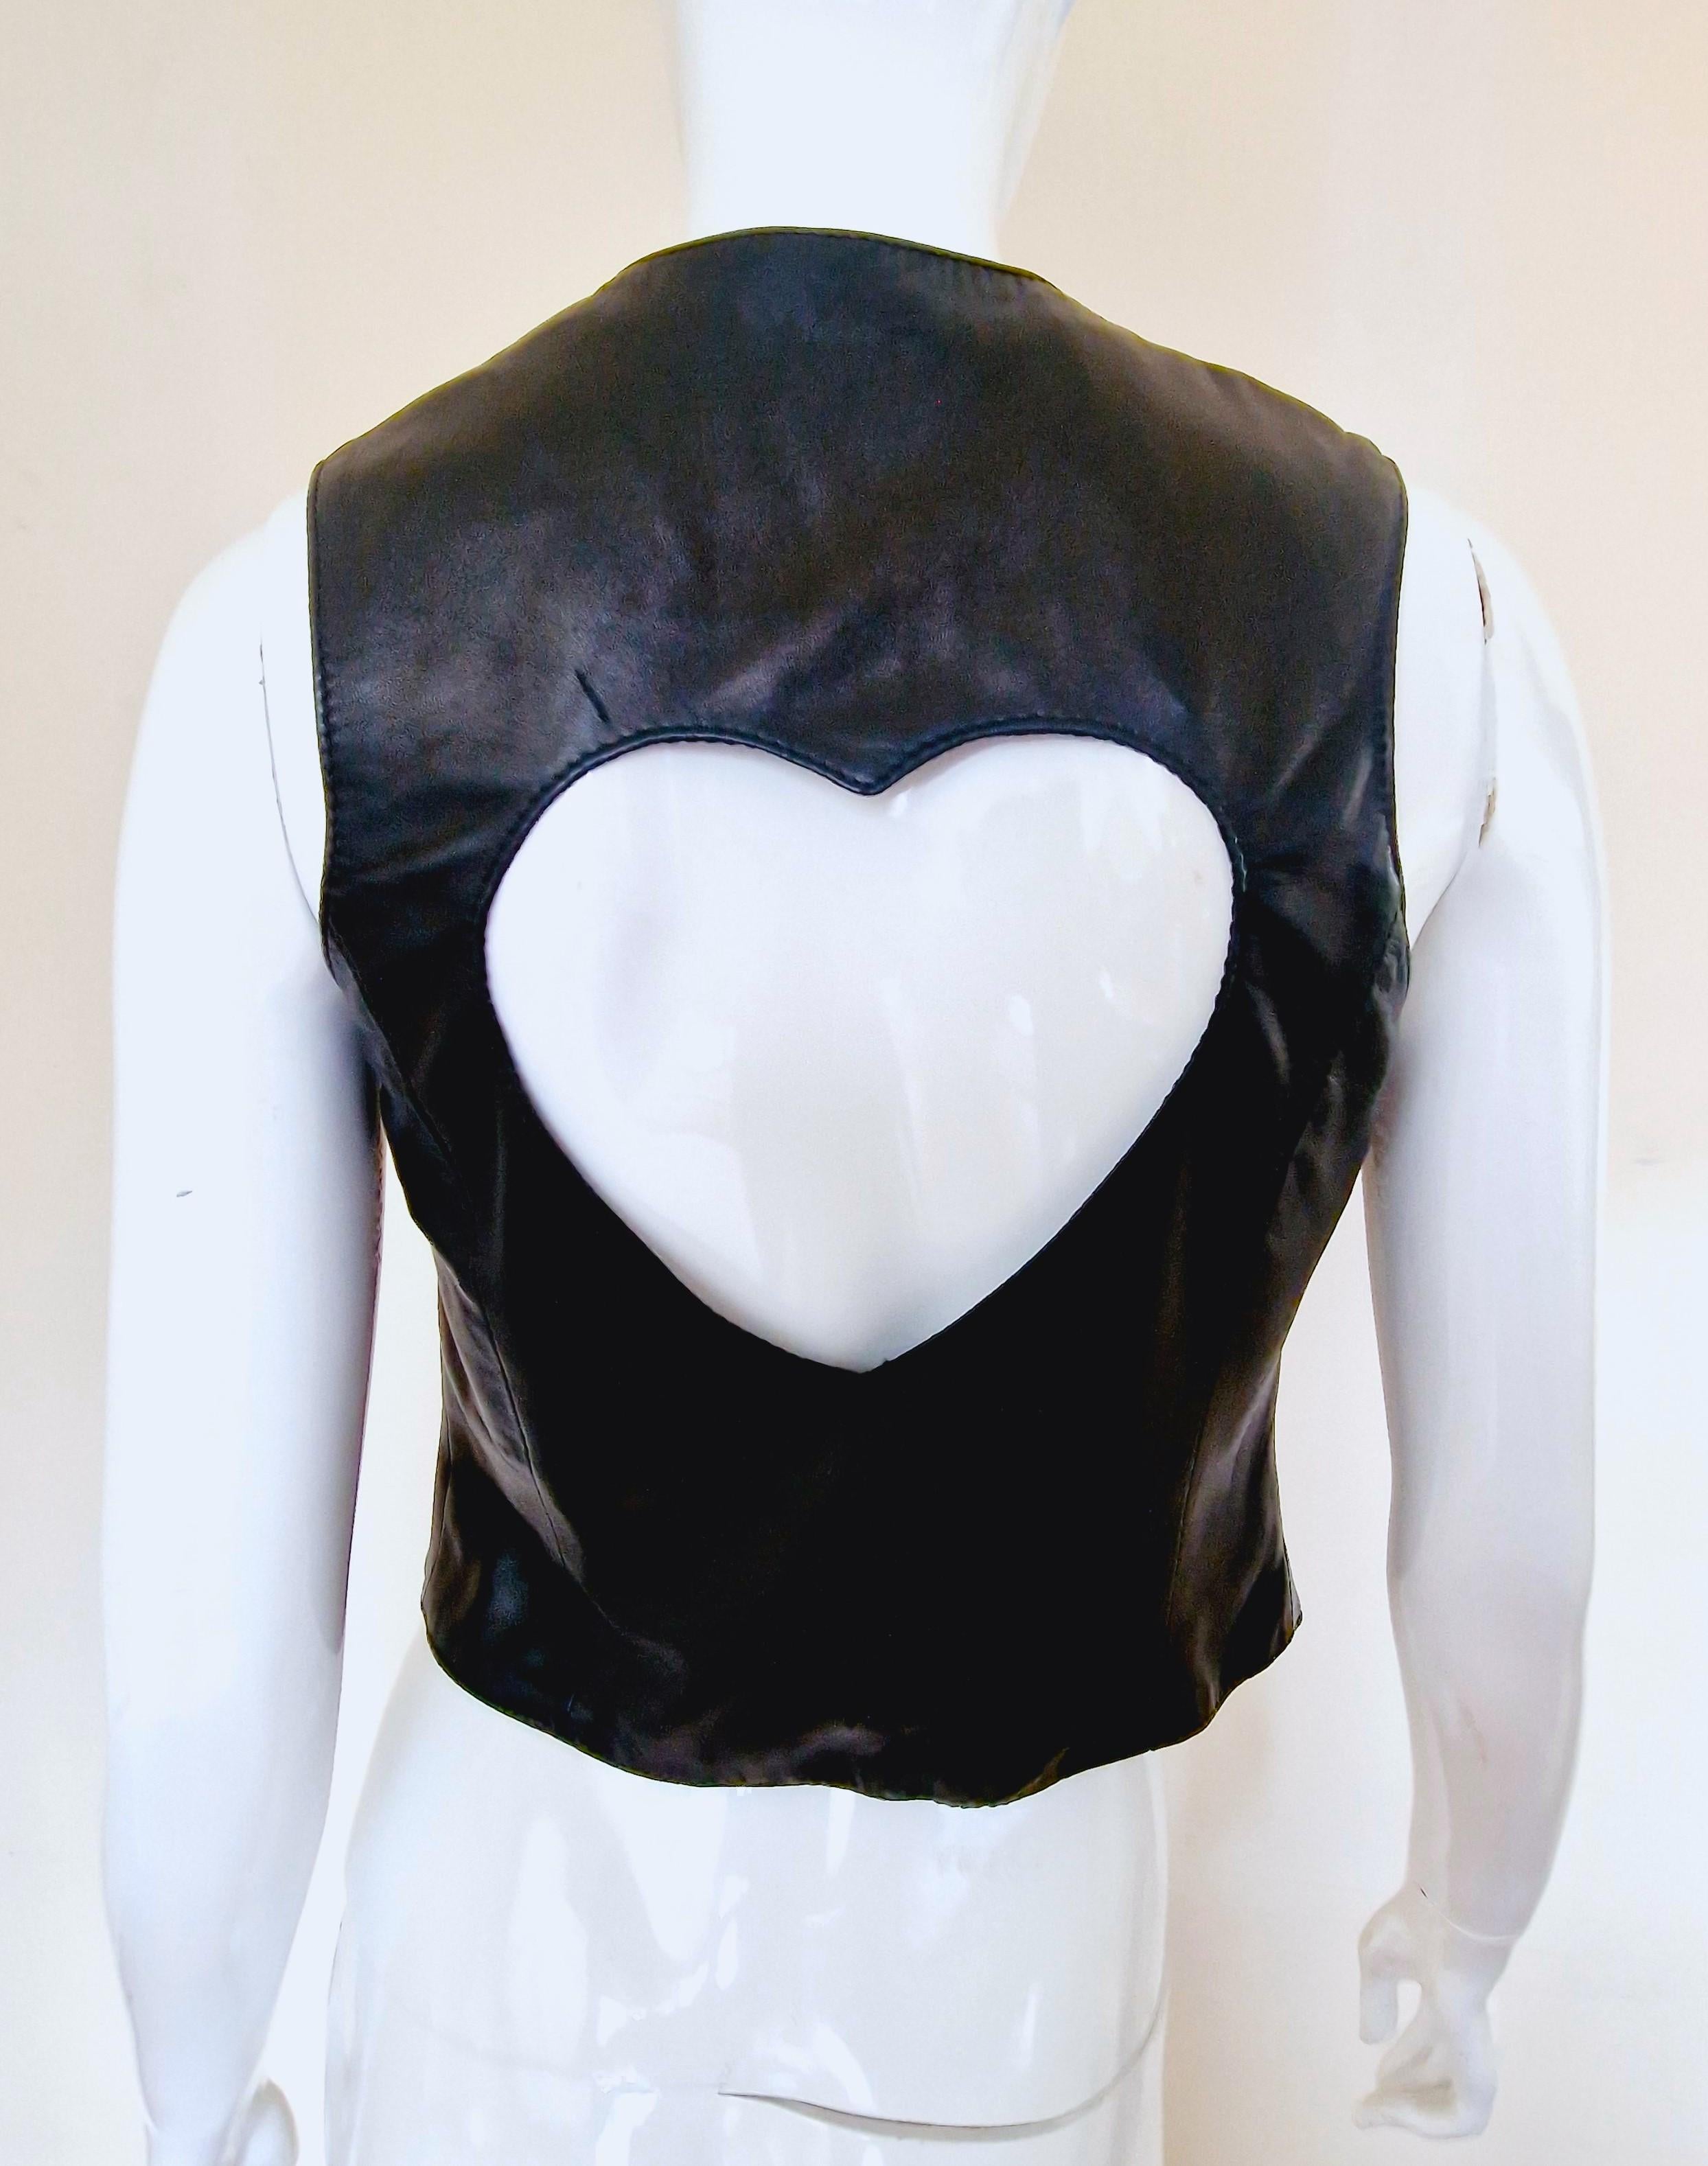 Moschino Leather Heart Cut out Cut-out Bella Hadid Top Jacket Black Medium Vest For Sale 6